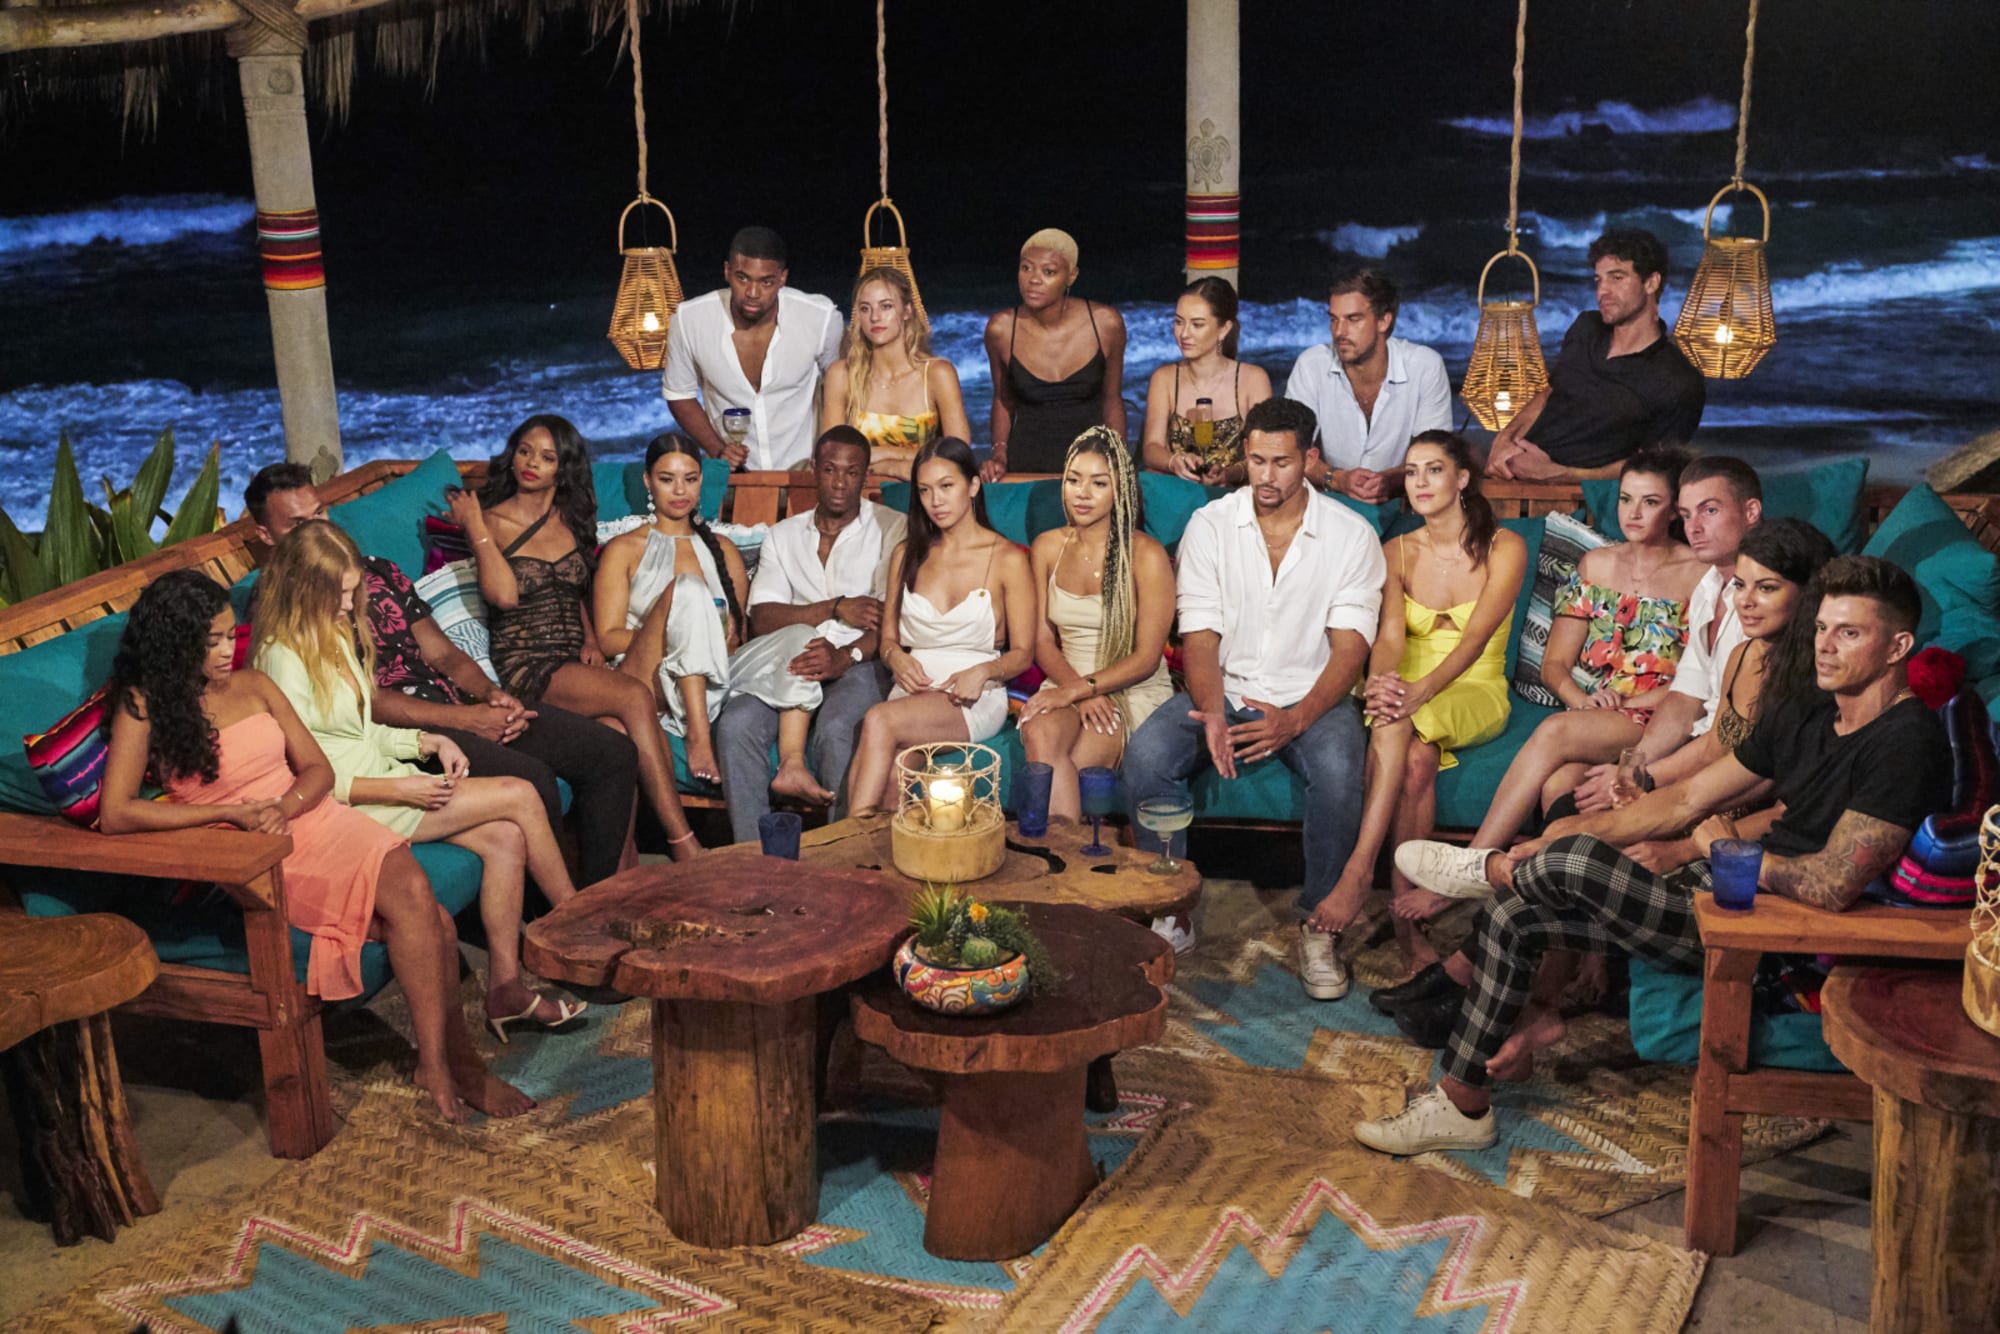 Bachelor In Paradise Season 8 - All You Need To Know!